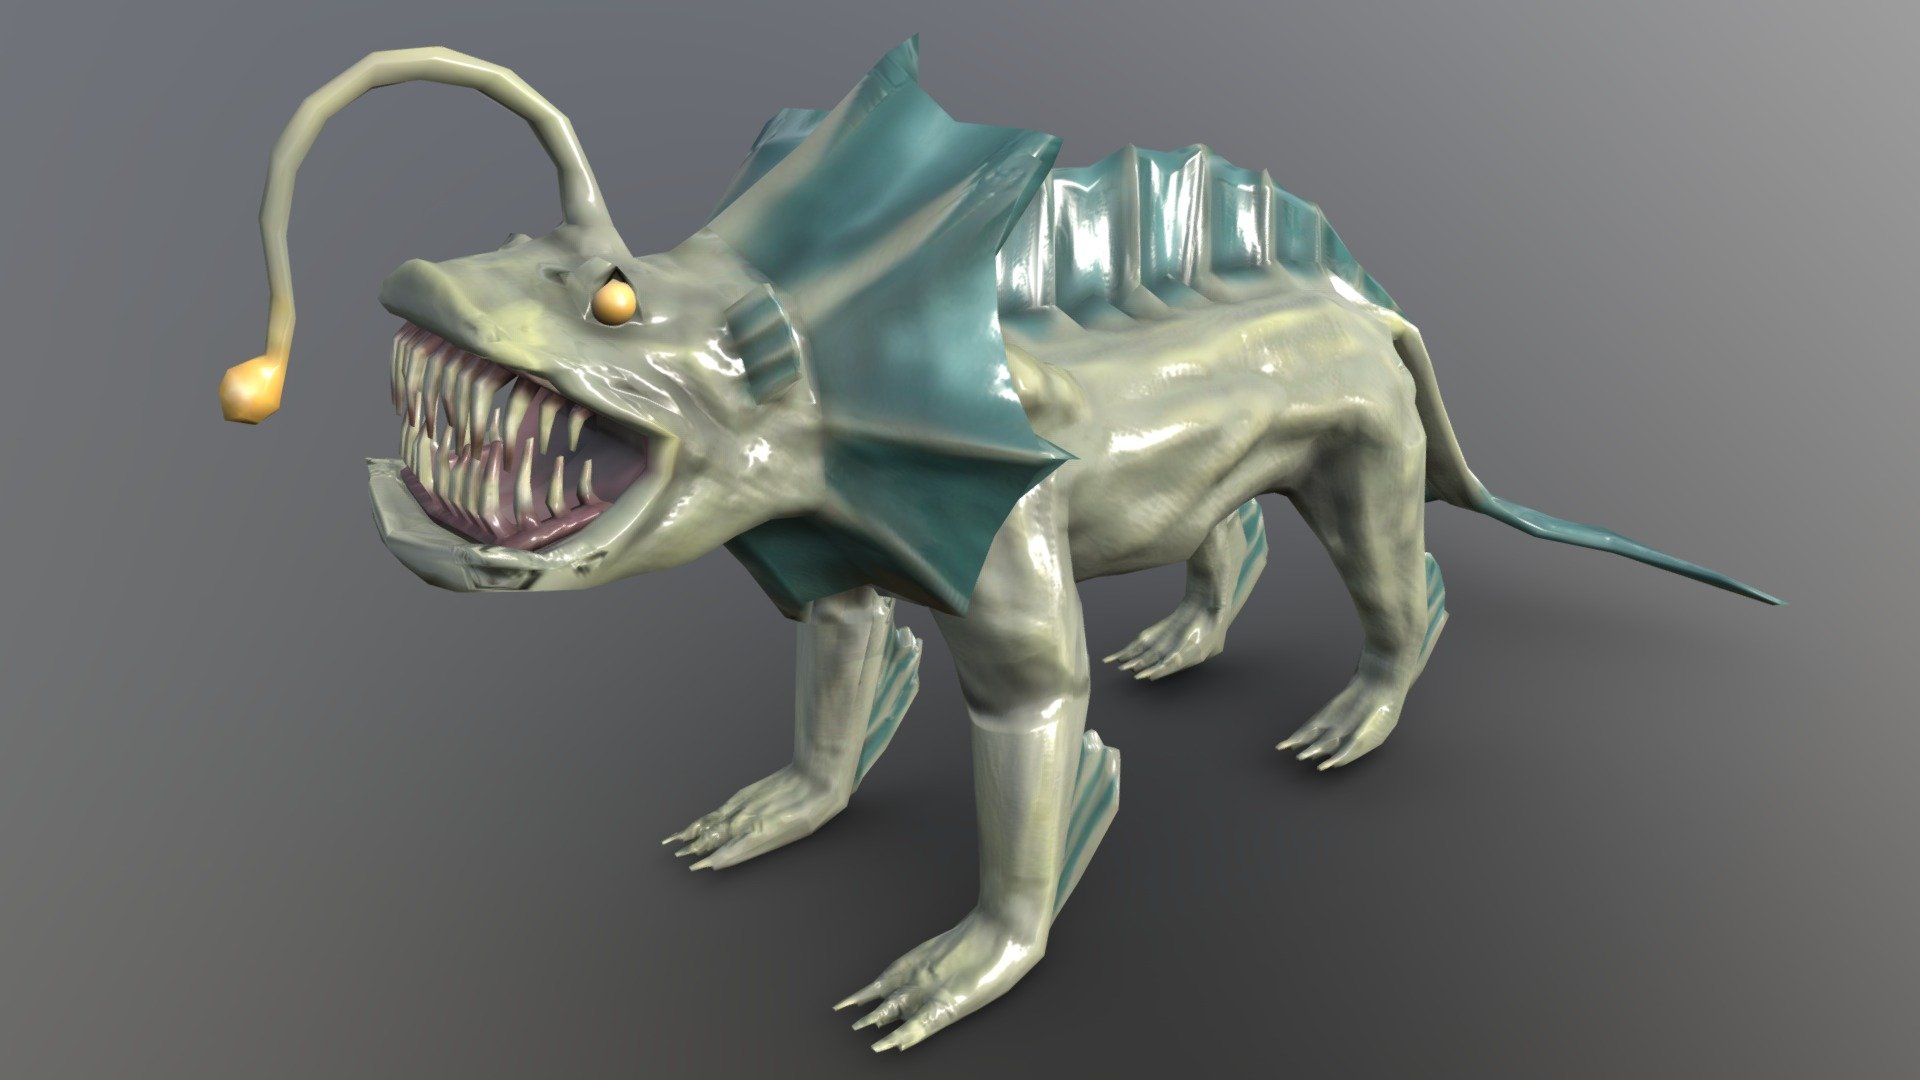 A creature design of an animal hybrid inspired by lion and angler fish features. This stemmed from the idea of having a creature in a surreal, horror setting. I pictured a twisted underwater cave setting, and what might lurk in there. Using the mythical creature the merlion as a basis, I created this model. I started by modeling in 3ds Max, and then moving onto Mudbox for sculpting and texturing 3d model